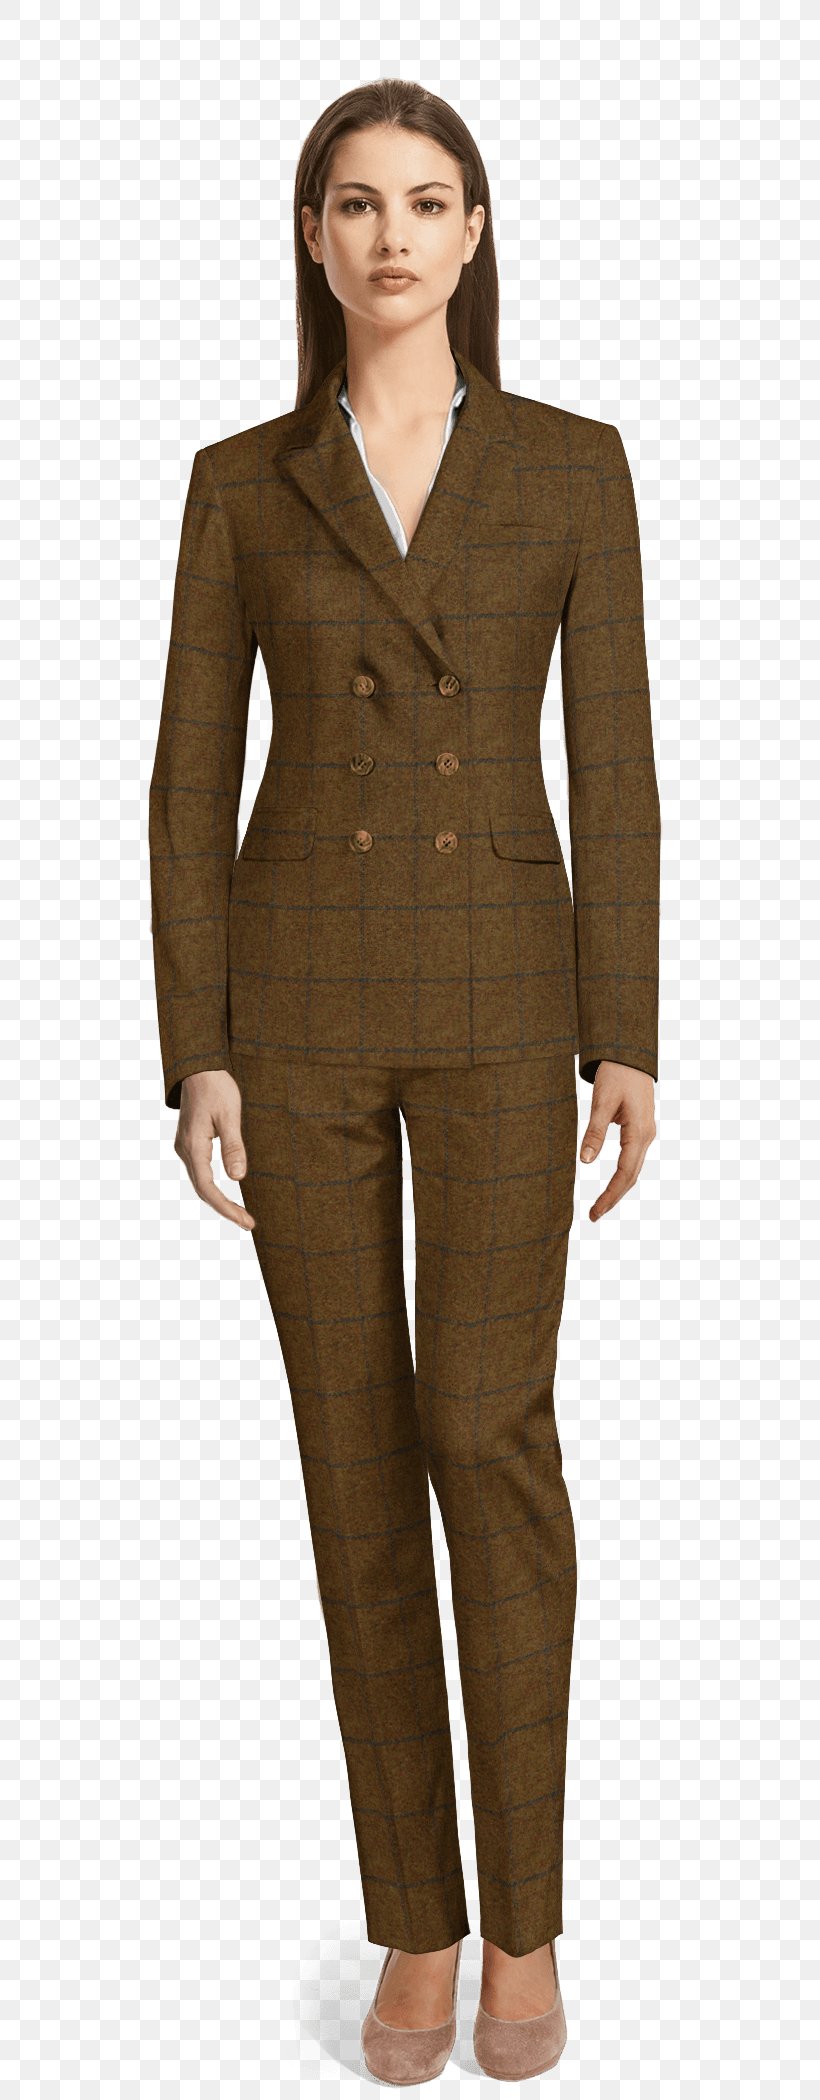 Pant Suits Jakkupuku Clothing Fashion, PNG, 655x2100px, Pant Suits, Blazer, Clothing, Doublebreasted, Dress Download Free